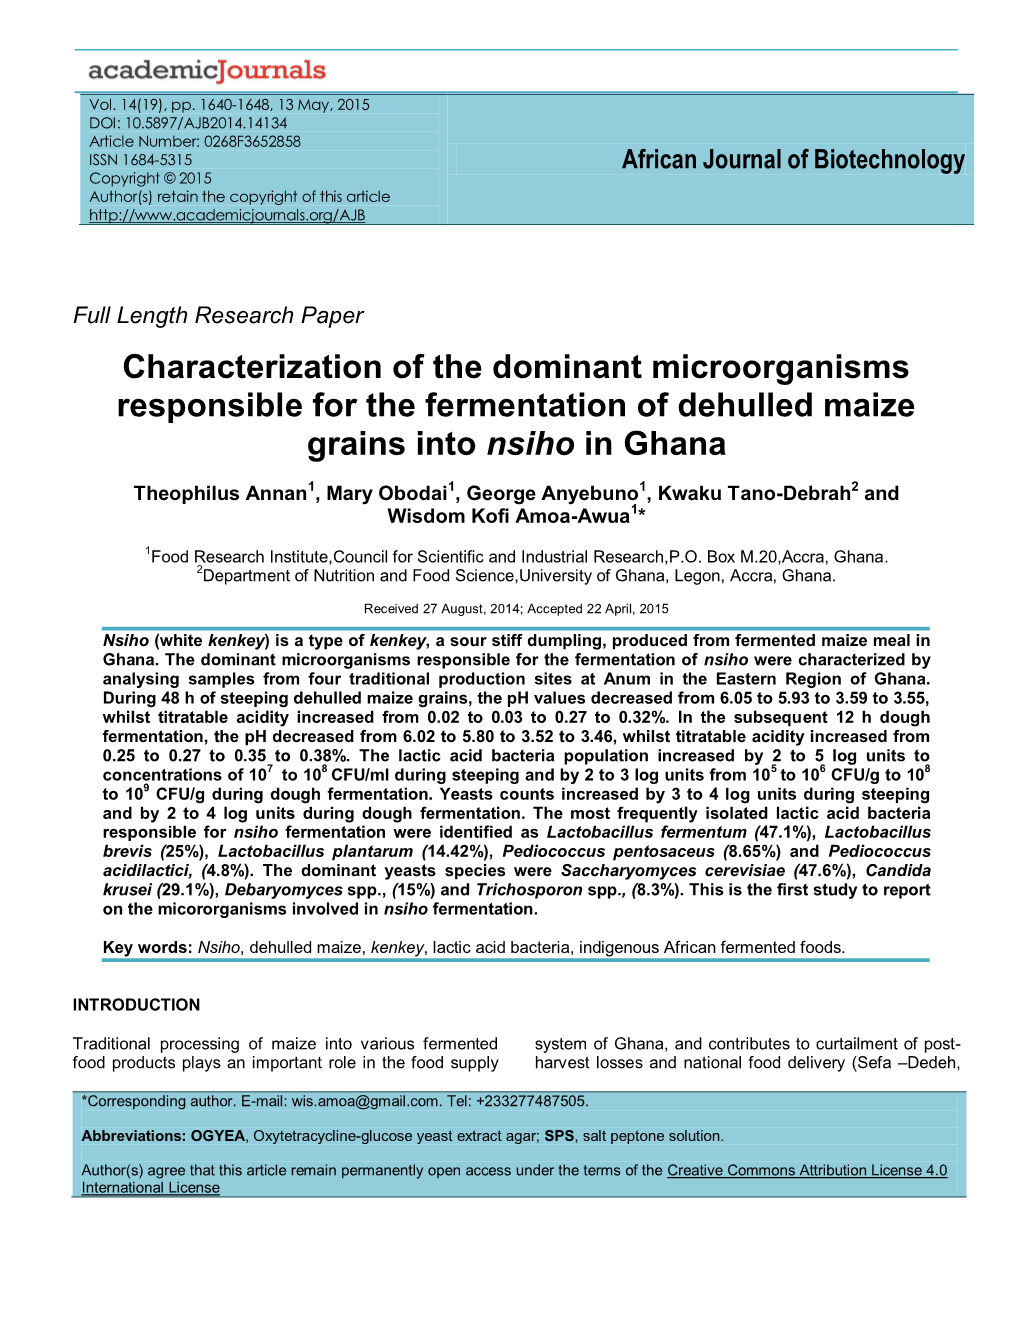 Characterization of the Dominant Microorganisms Responsible for the Fermentation of Dehulled Maize Grains Into Nsiho in Ghana